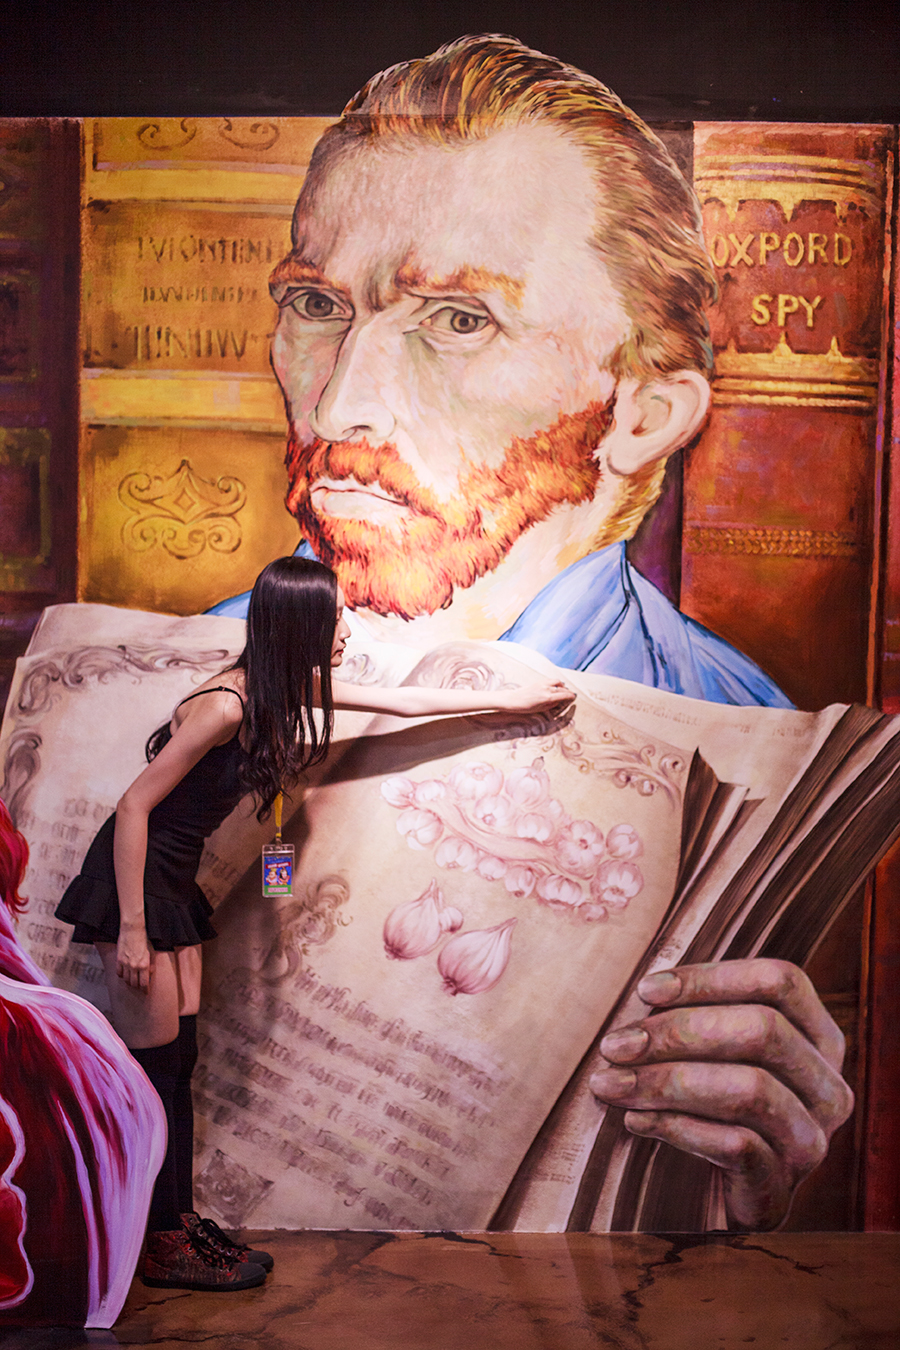 Turning a page of Vincent Van Gogh's book trompe-l'œil at the Trick Eye Museum Renewal Event in Singapore, Resorts World Sentosa.